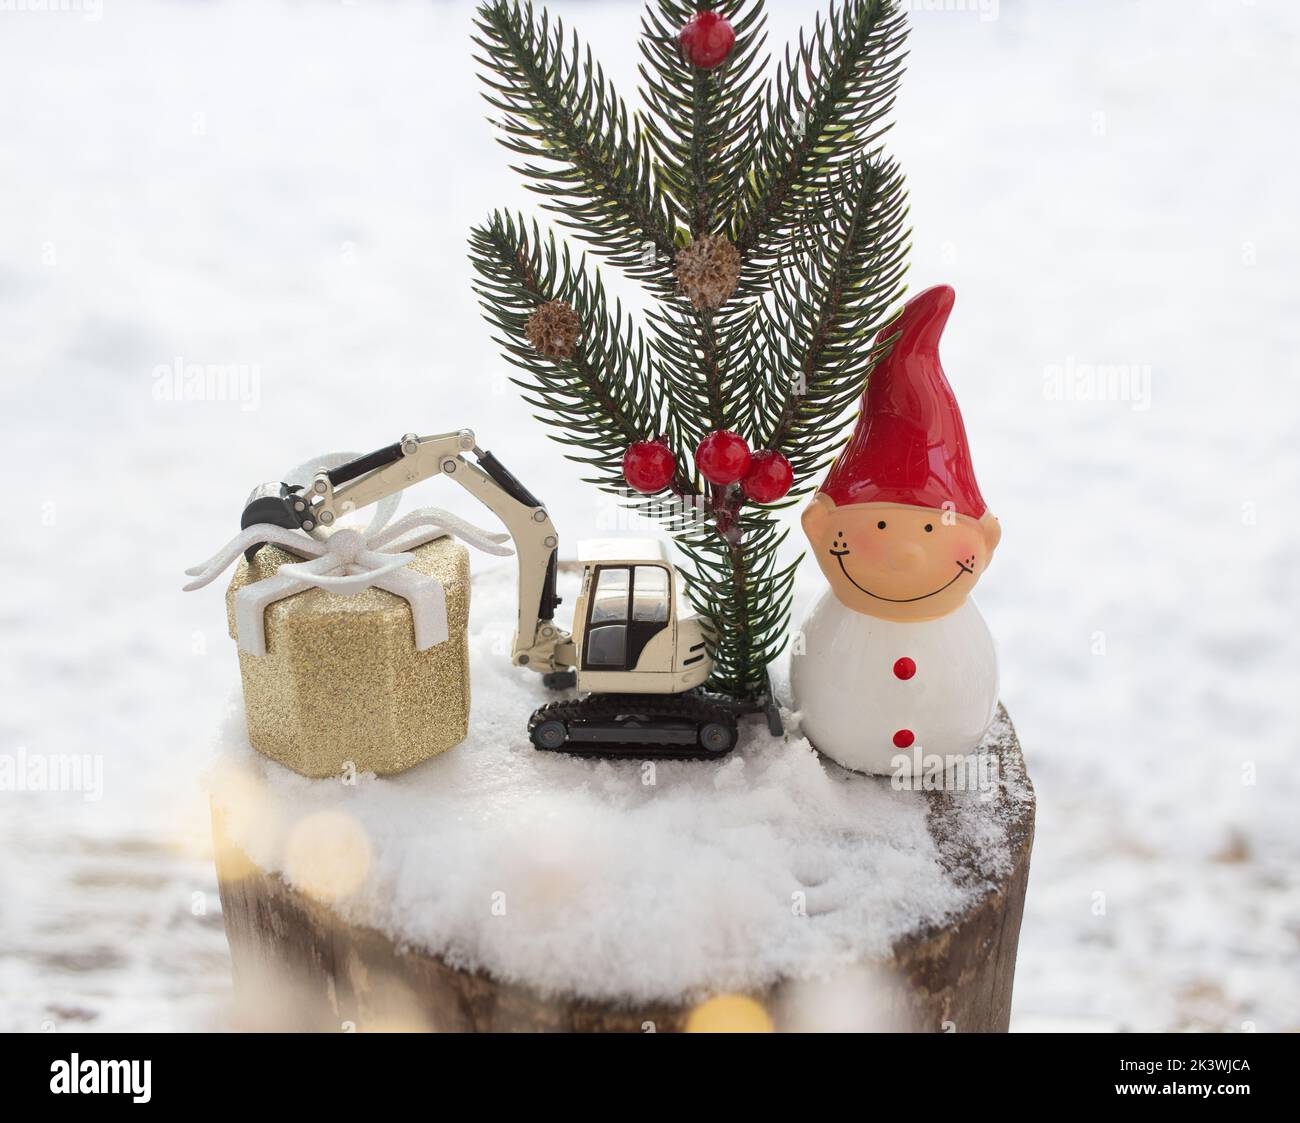 miniature toy construction excavator and souvenir figurine of elf,coniferous branch stand in snow in composition on theme of New Year, Christmas greet Stock Photo